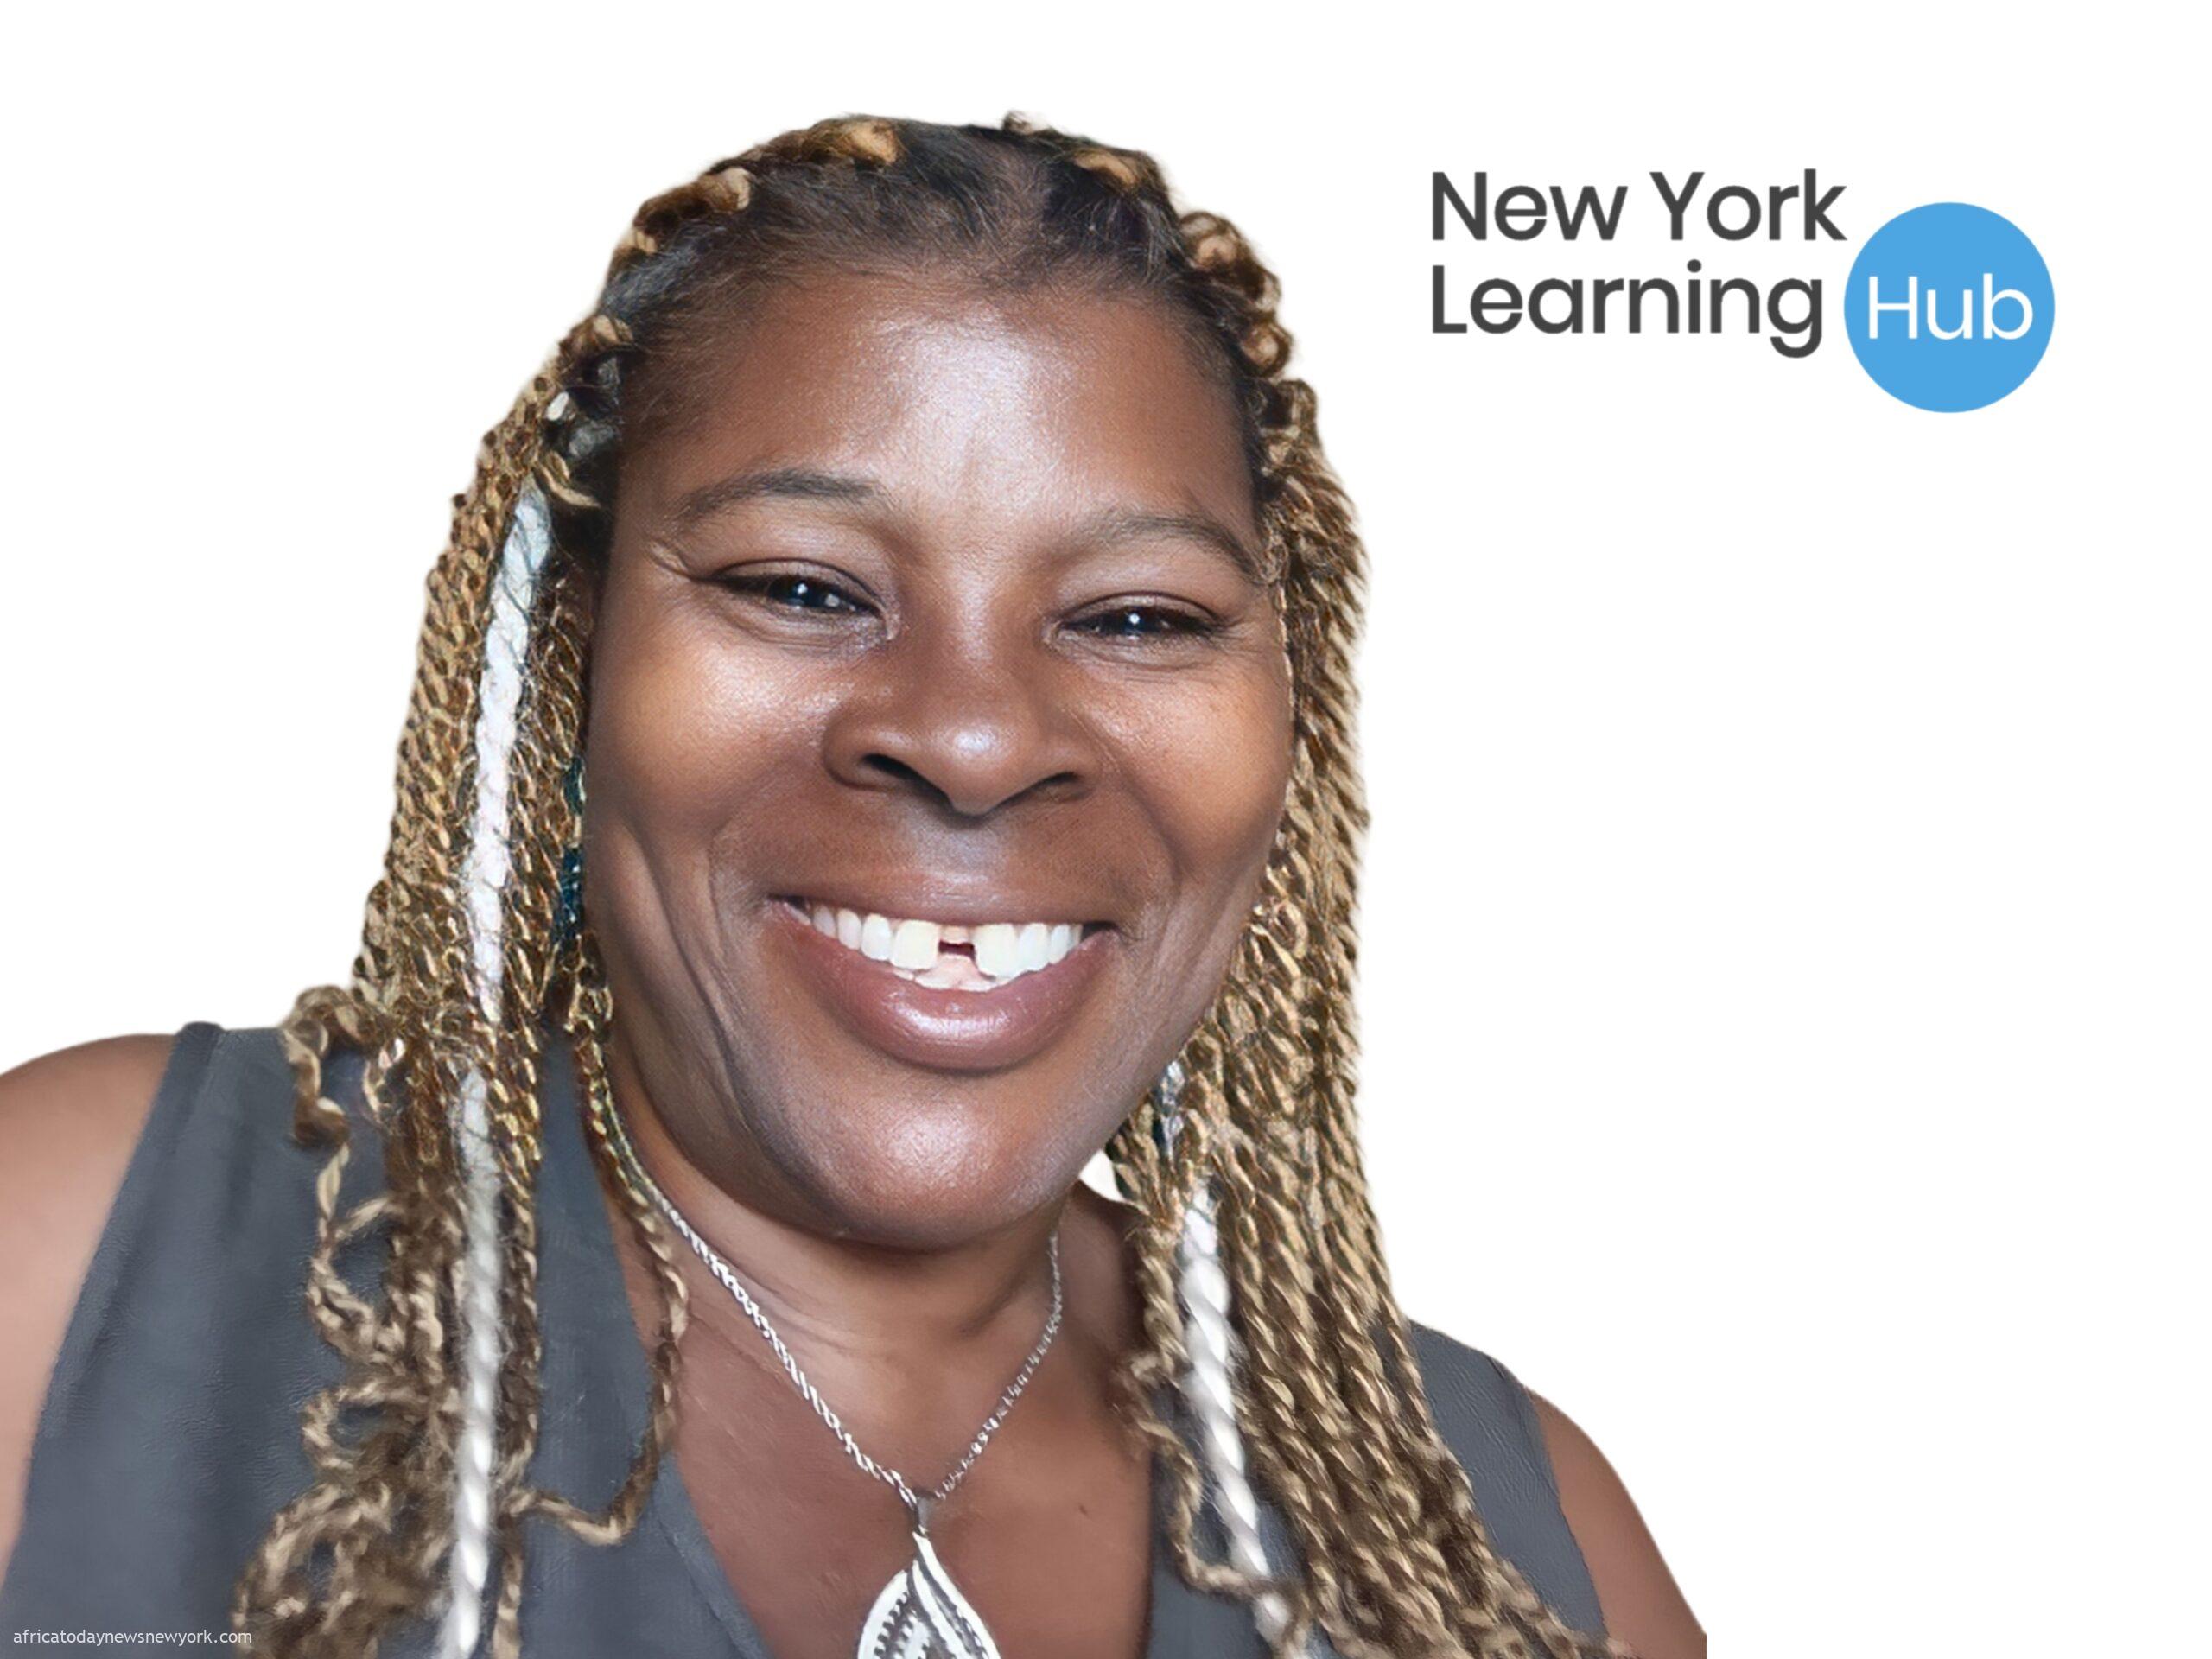 Dr. N.G. Ogbonna's Critical Care Clarity At NY Learning Hub